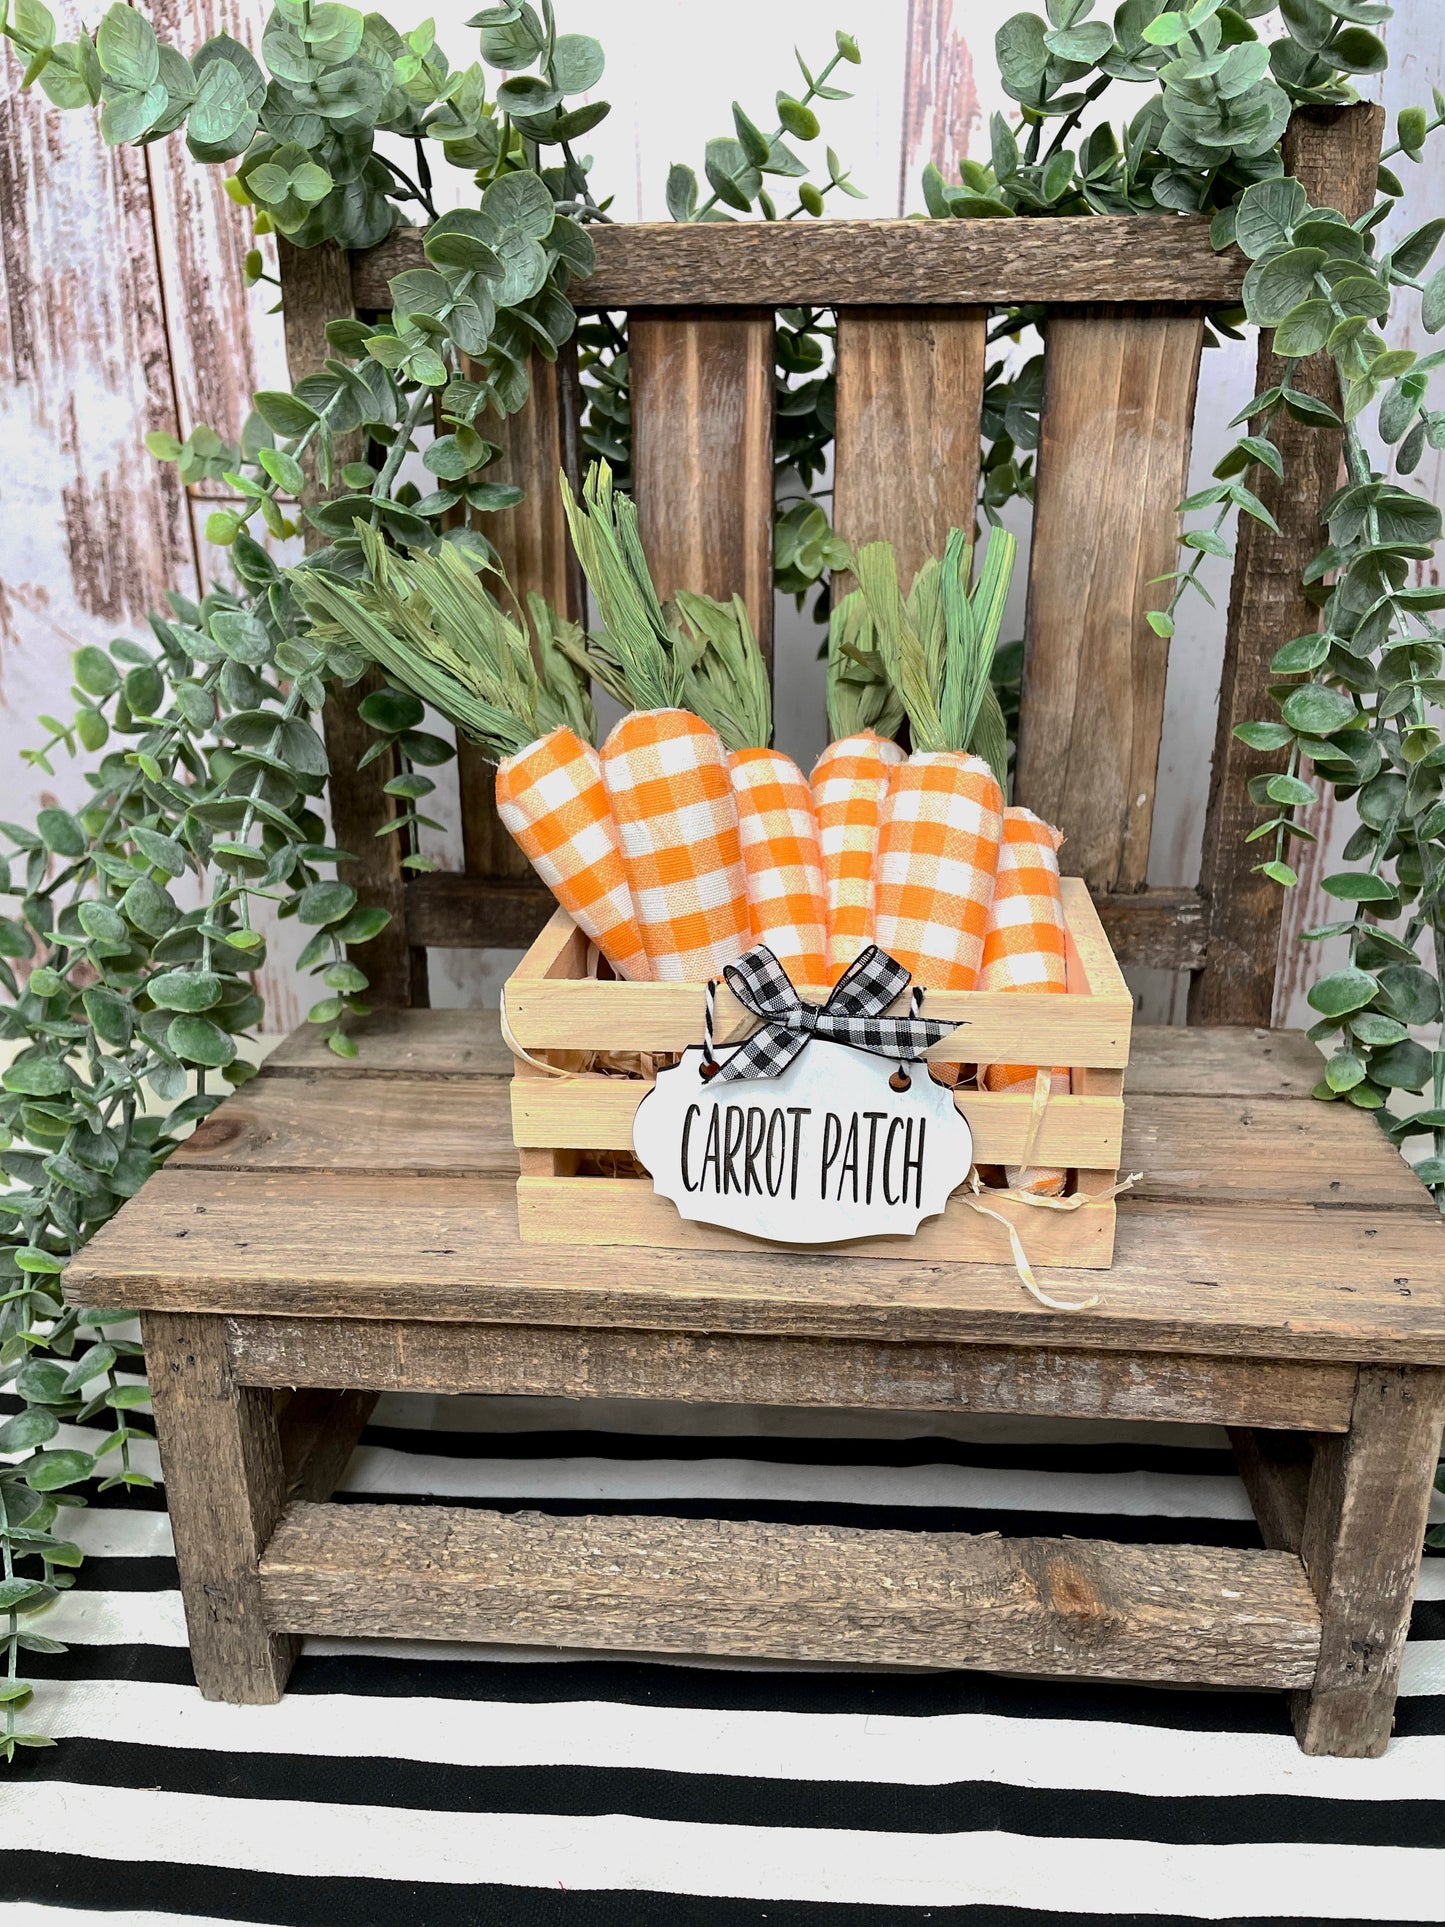 Carrot patch crate